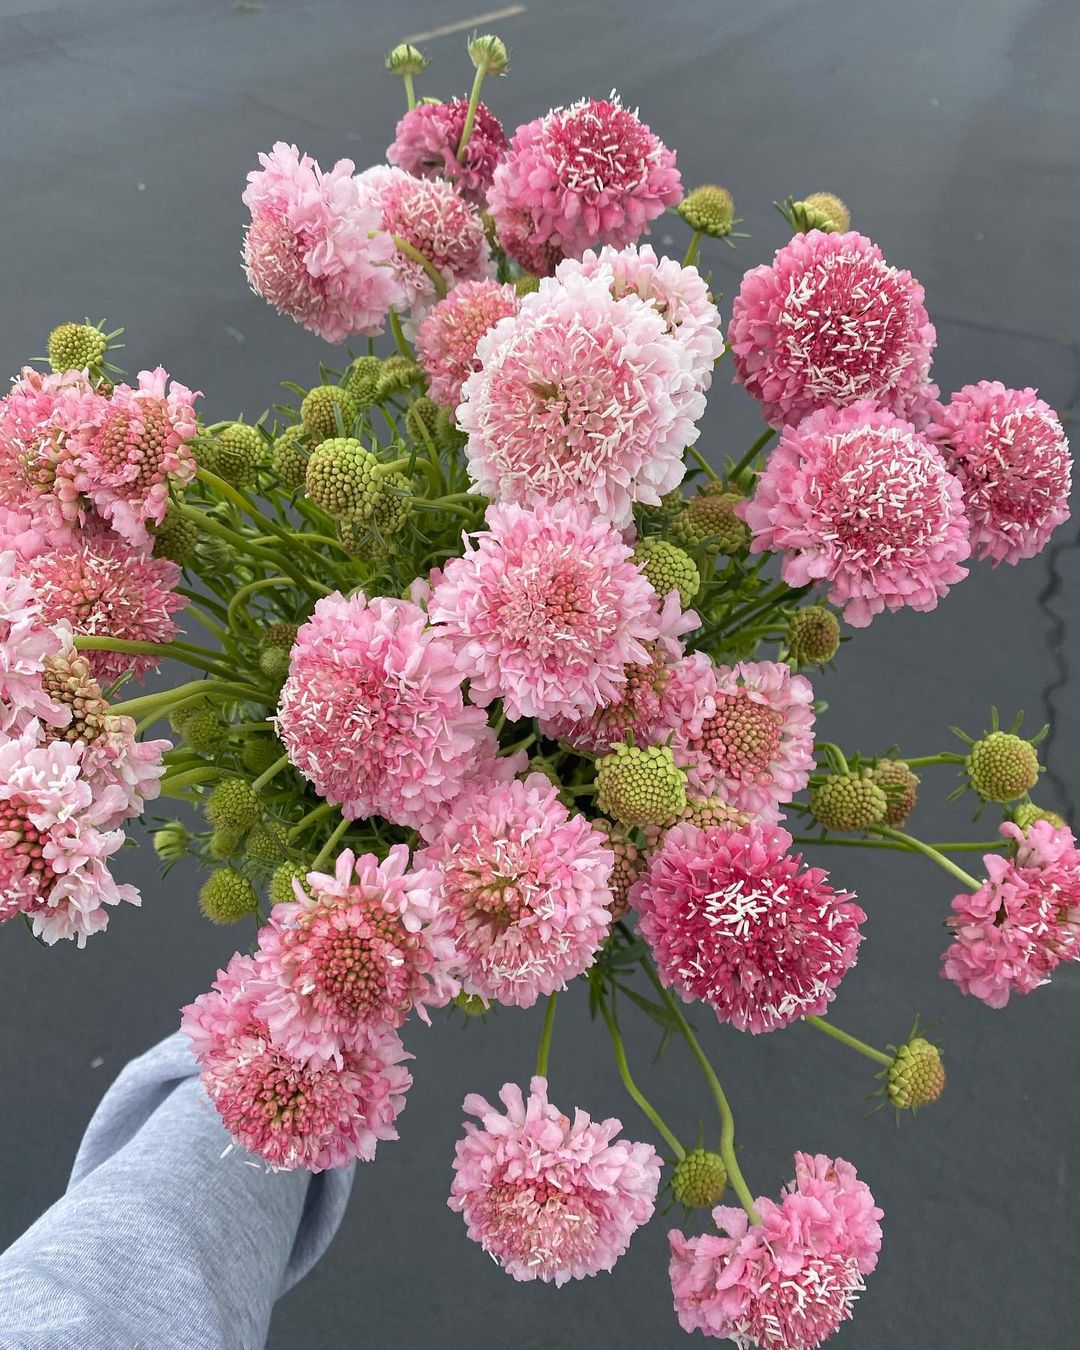 18 Most Popular Types Of Scabiosa Pictorial Guide